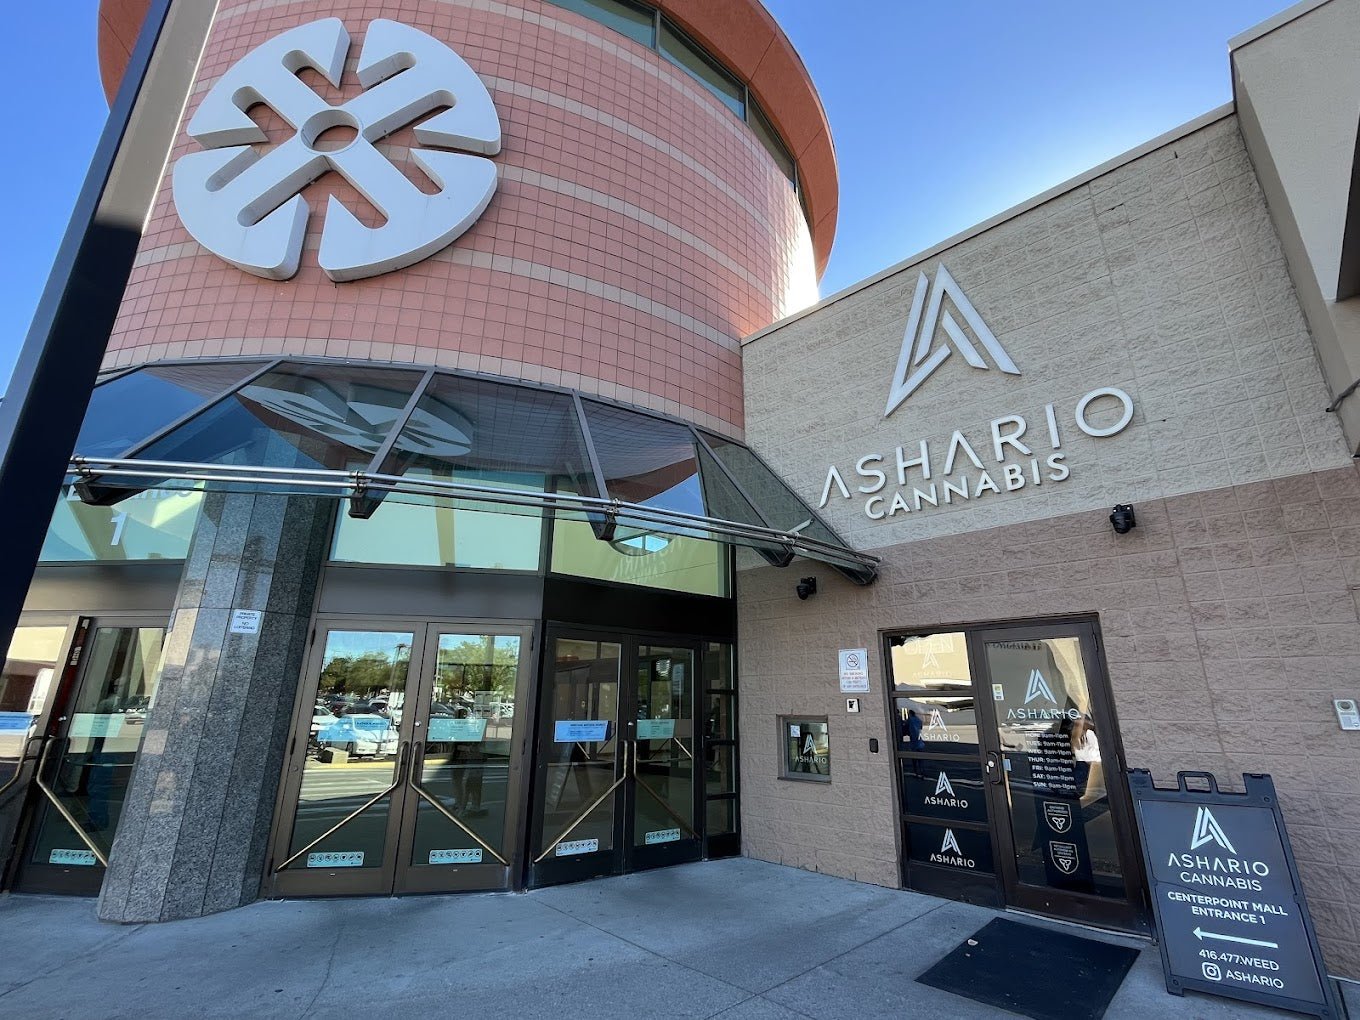 Embark on an unparalleled cannabis journey at Ashario Cannabis, the best weed store experience within the vicinity of Markham.